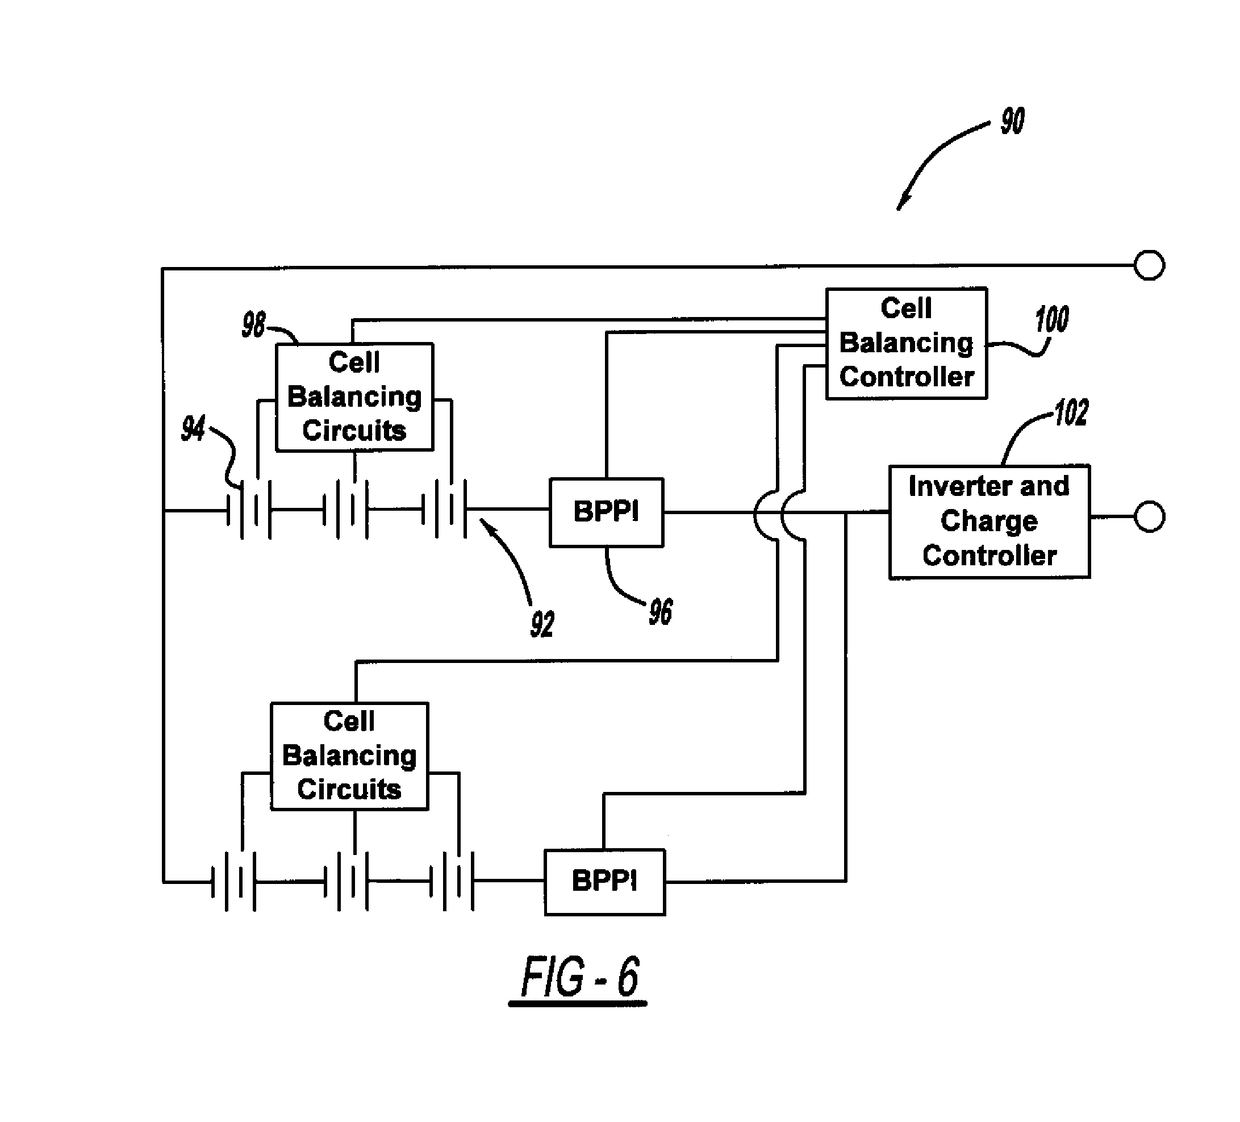 Battery fault tolerant architecture for cell failure modes parallel bypass circuit